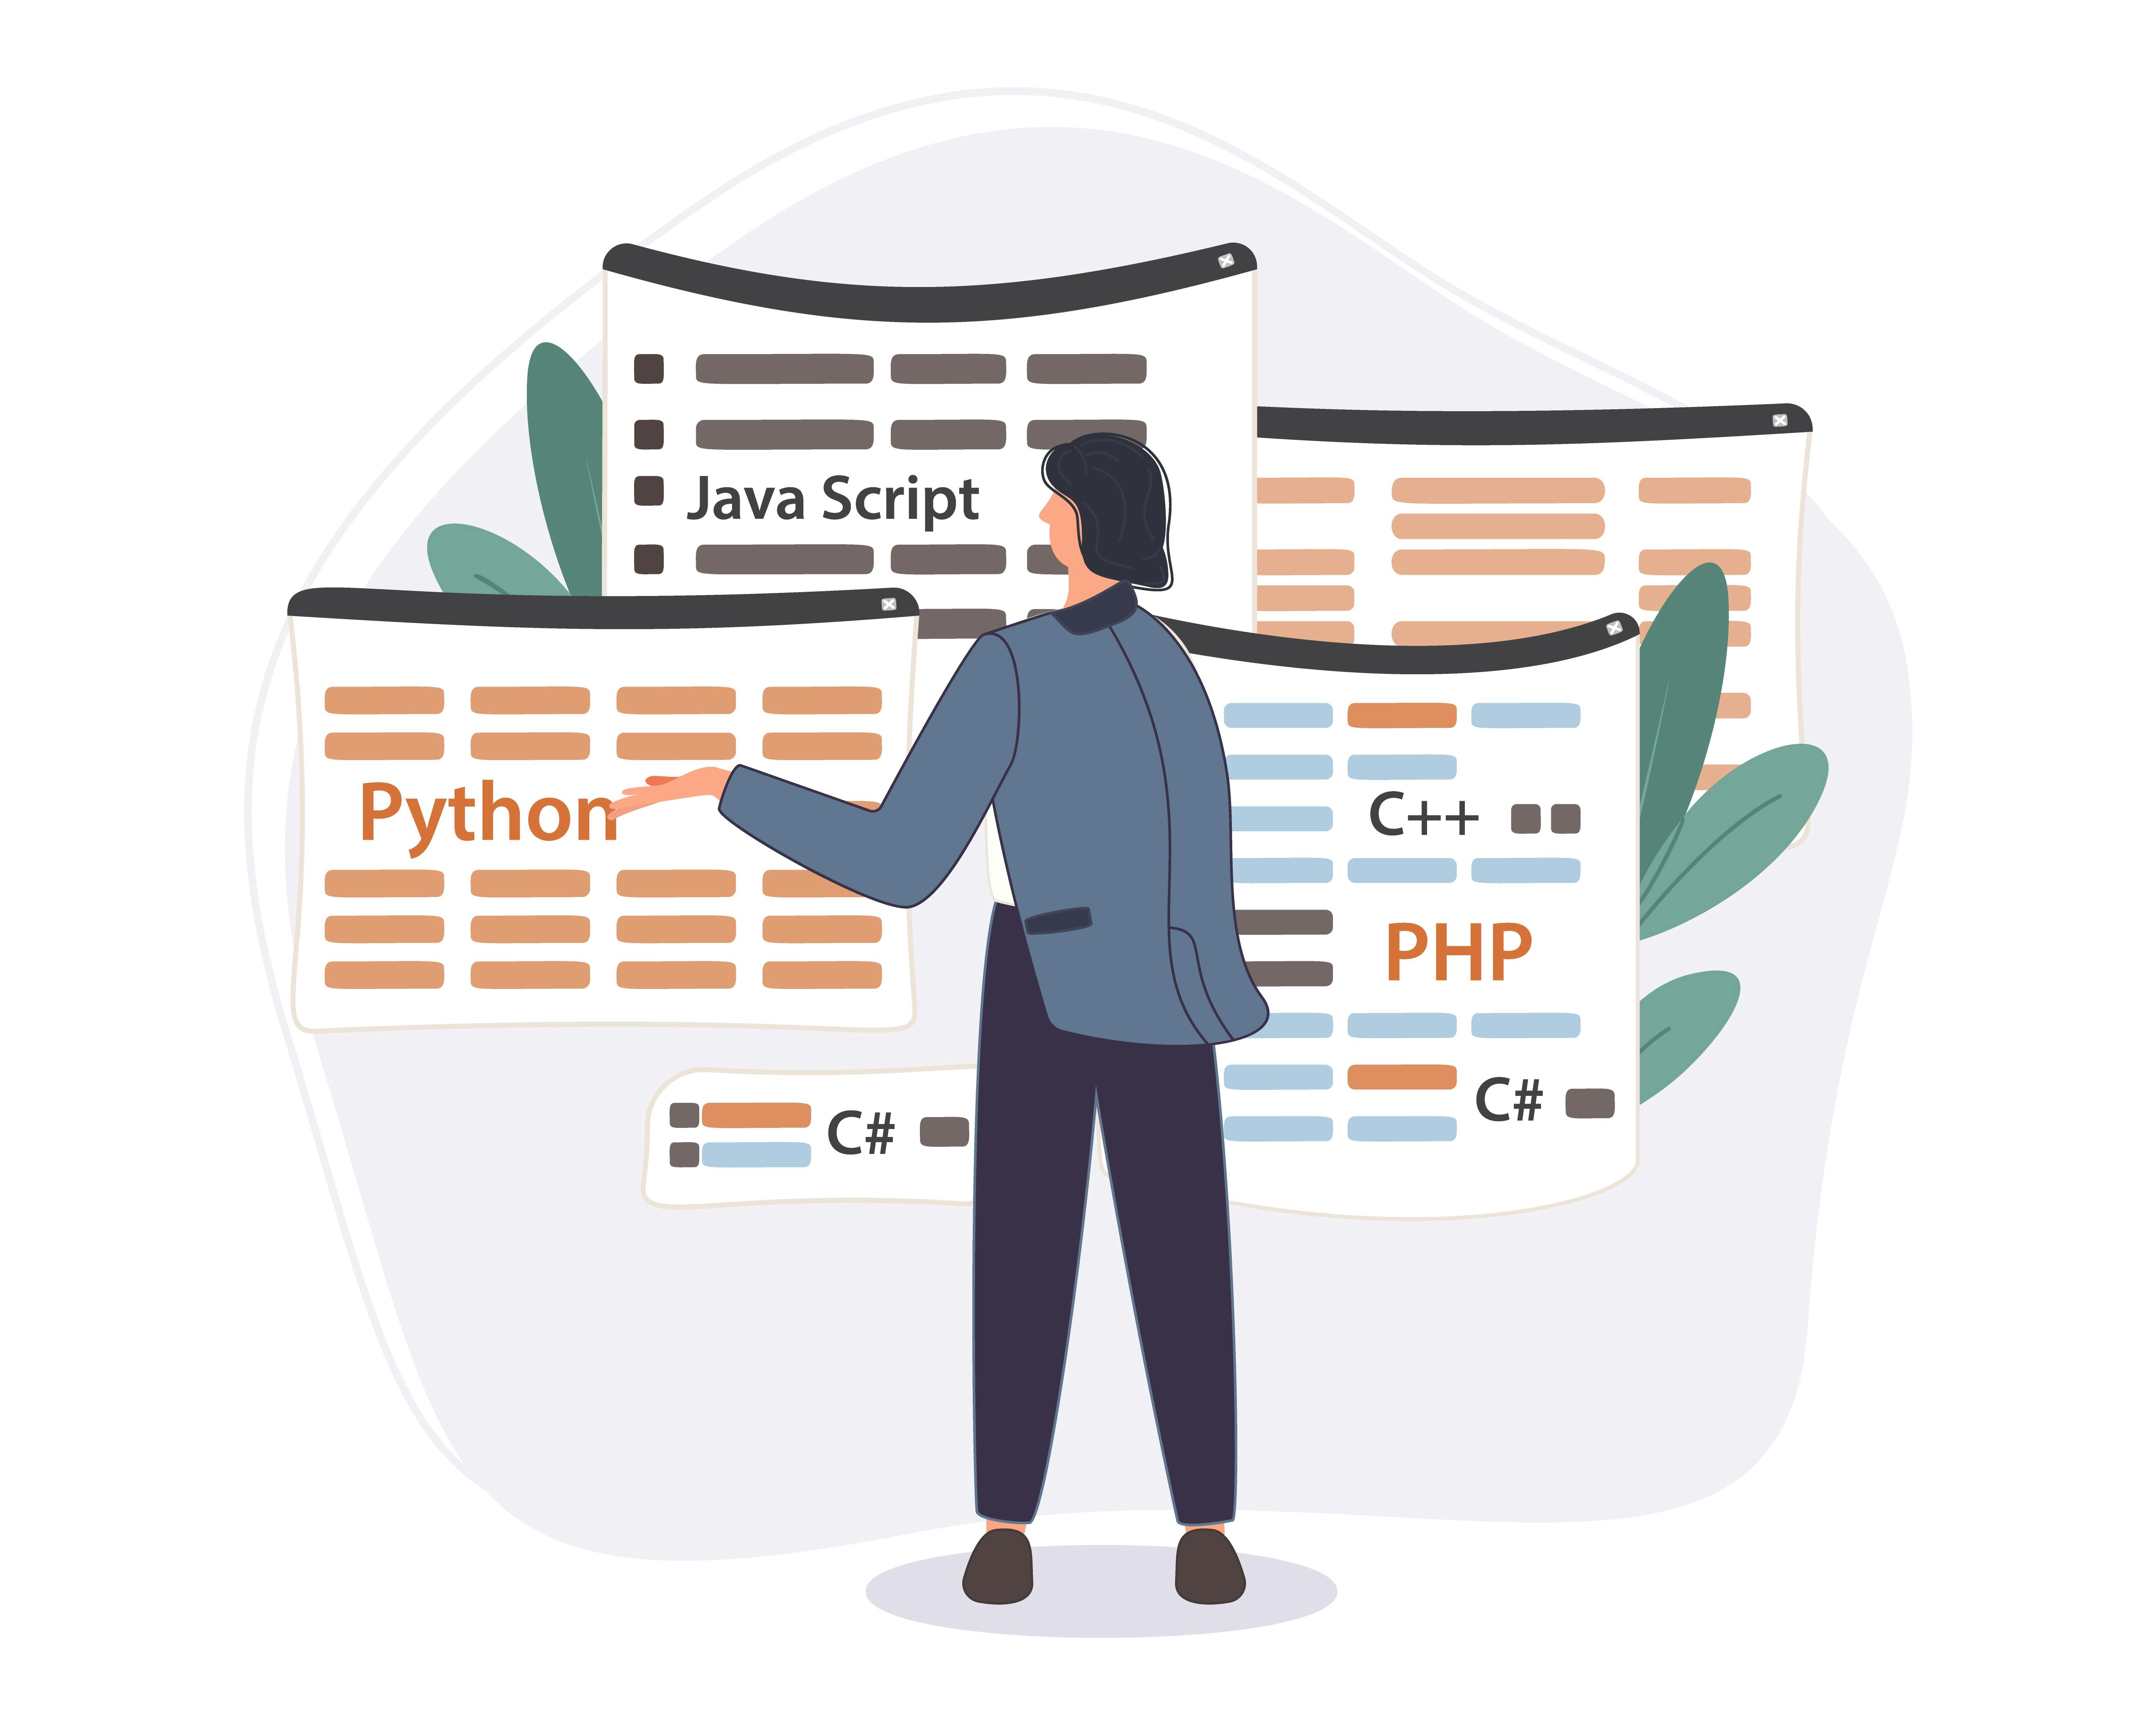 <a href="https://www.freepik.com/free-vector/programmer-working-web-development-code-engineer-programming-python-php-java-script-computer_14723889.htm#query=programming%20languages&position=20&from_view=search&track=sph">Image by svstudioart</a> on Freepik